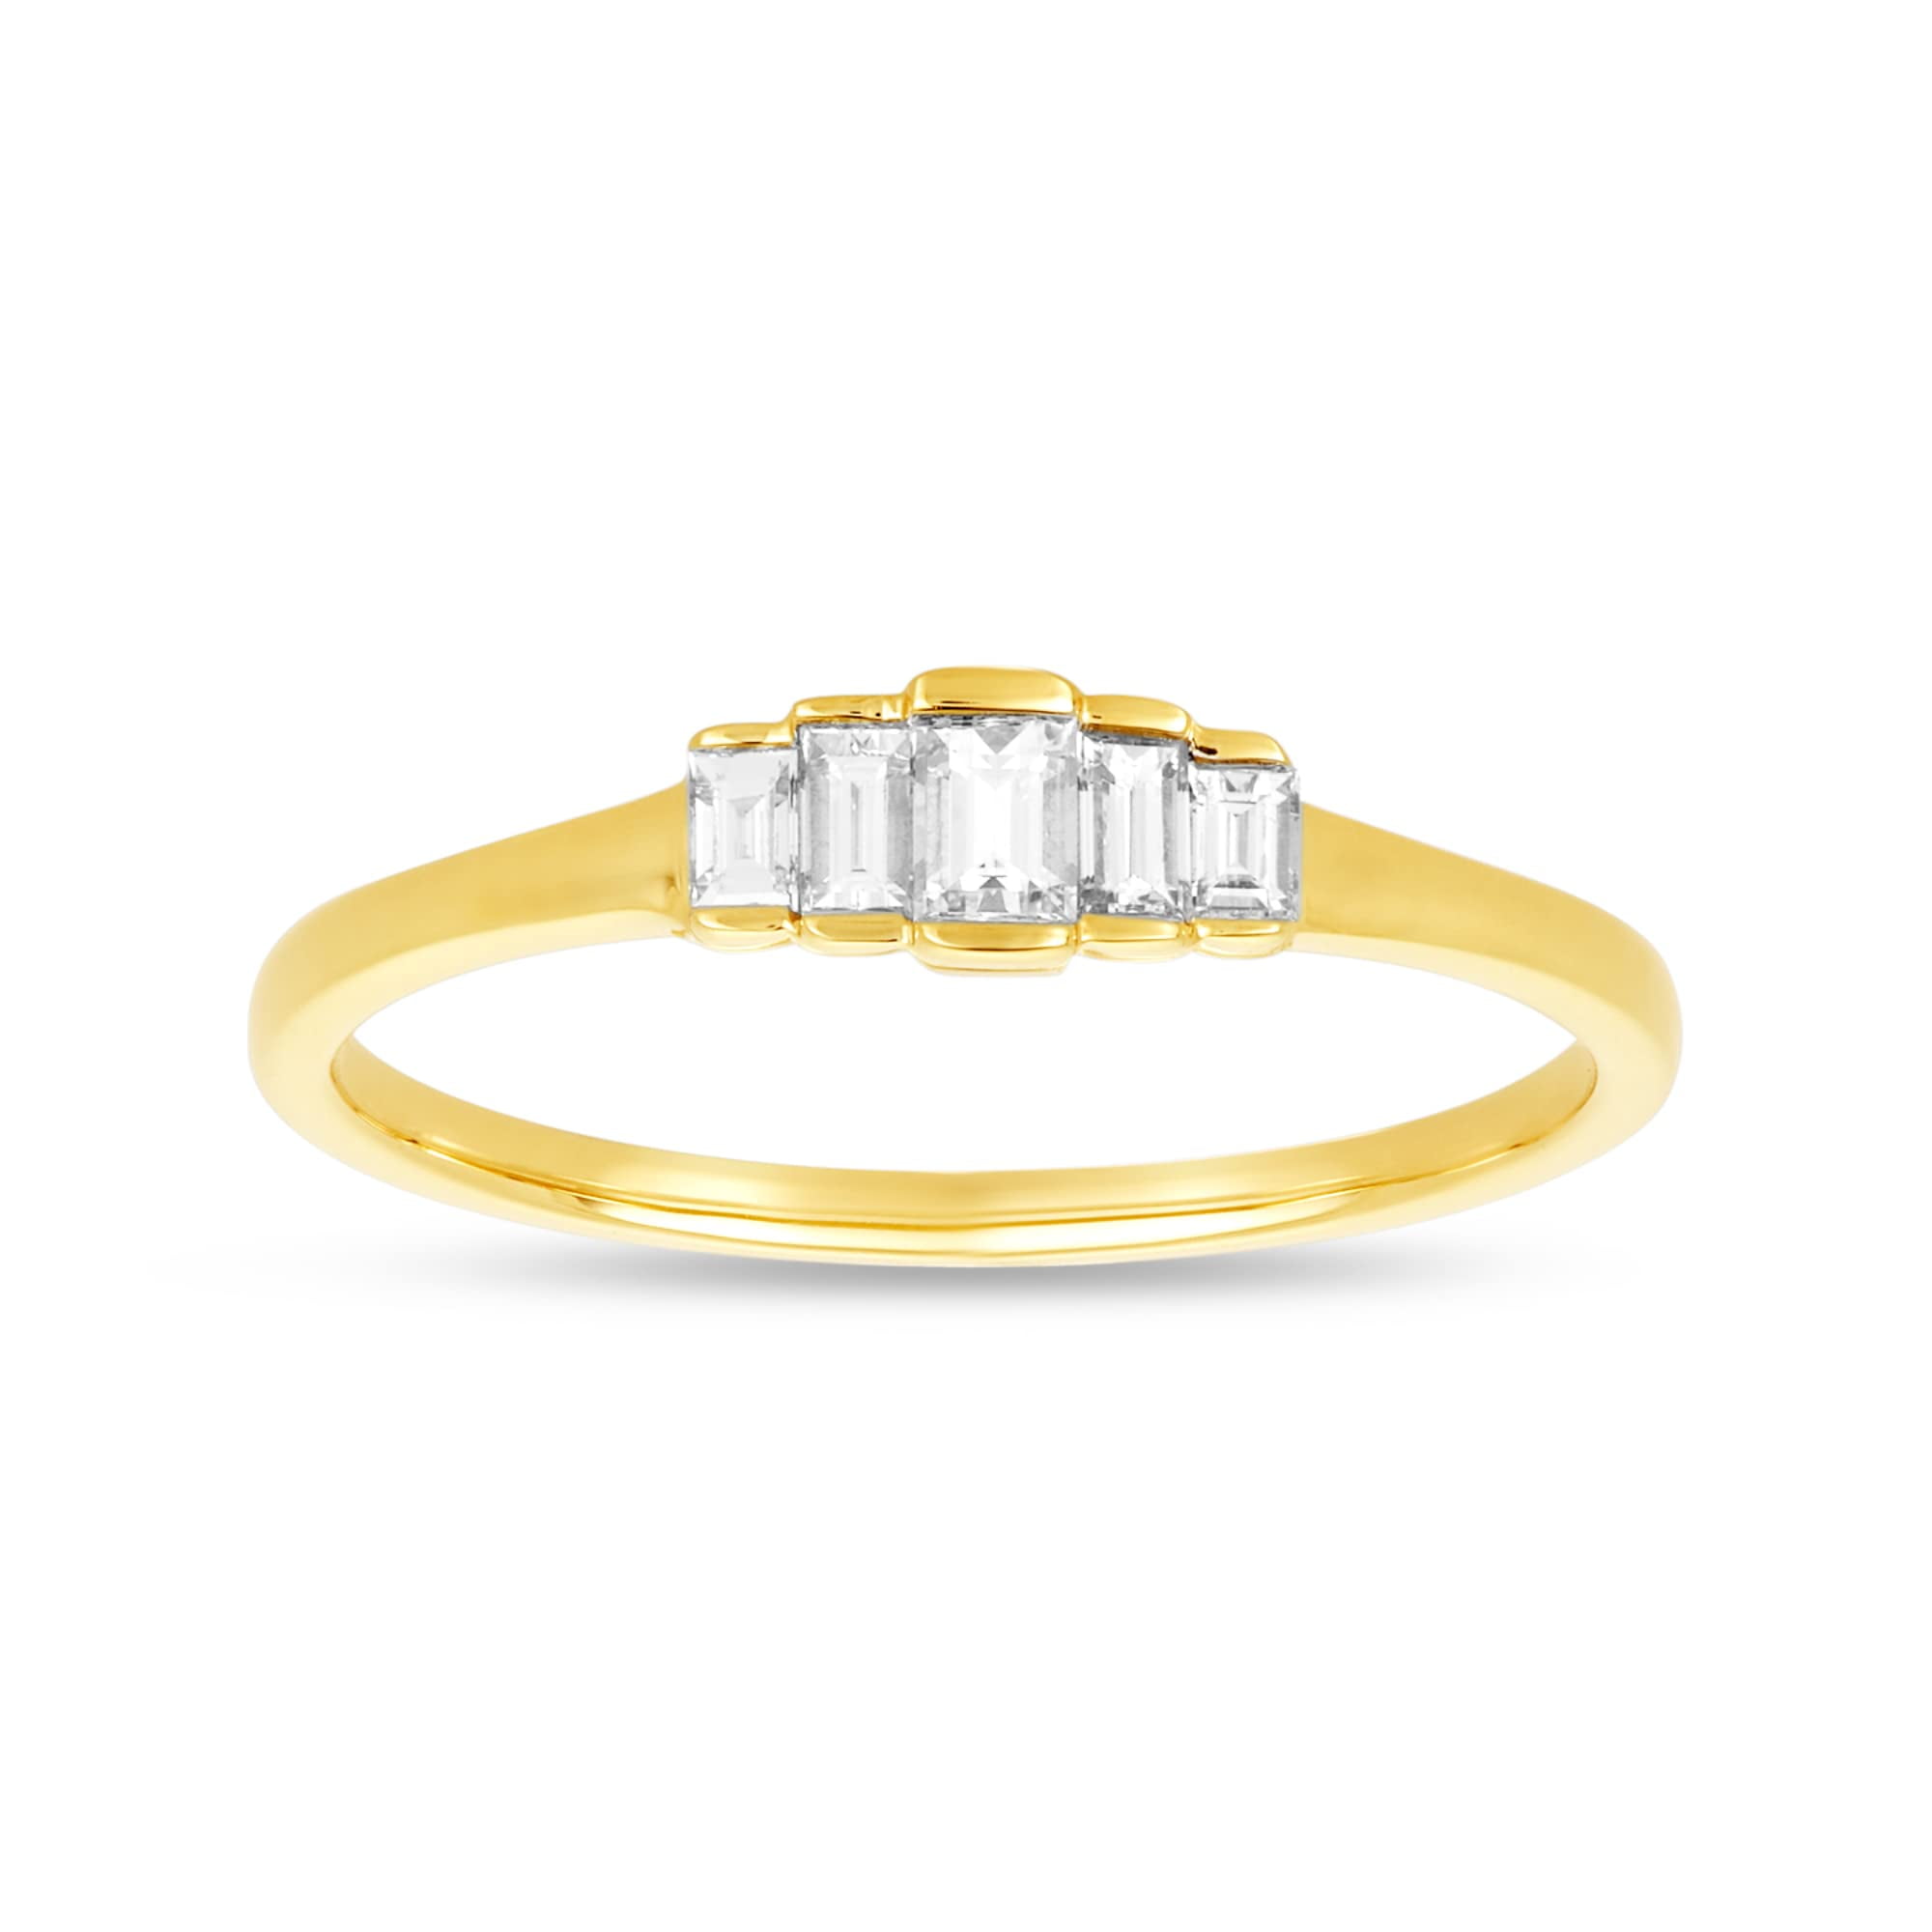 Details about   1.50Ct Round Cut Diamond 10K Yellow Gold Over Bridal Engagement Wedding Ring Set 